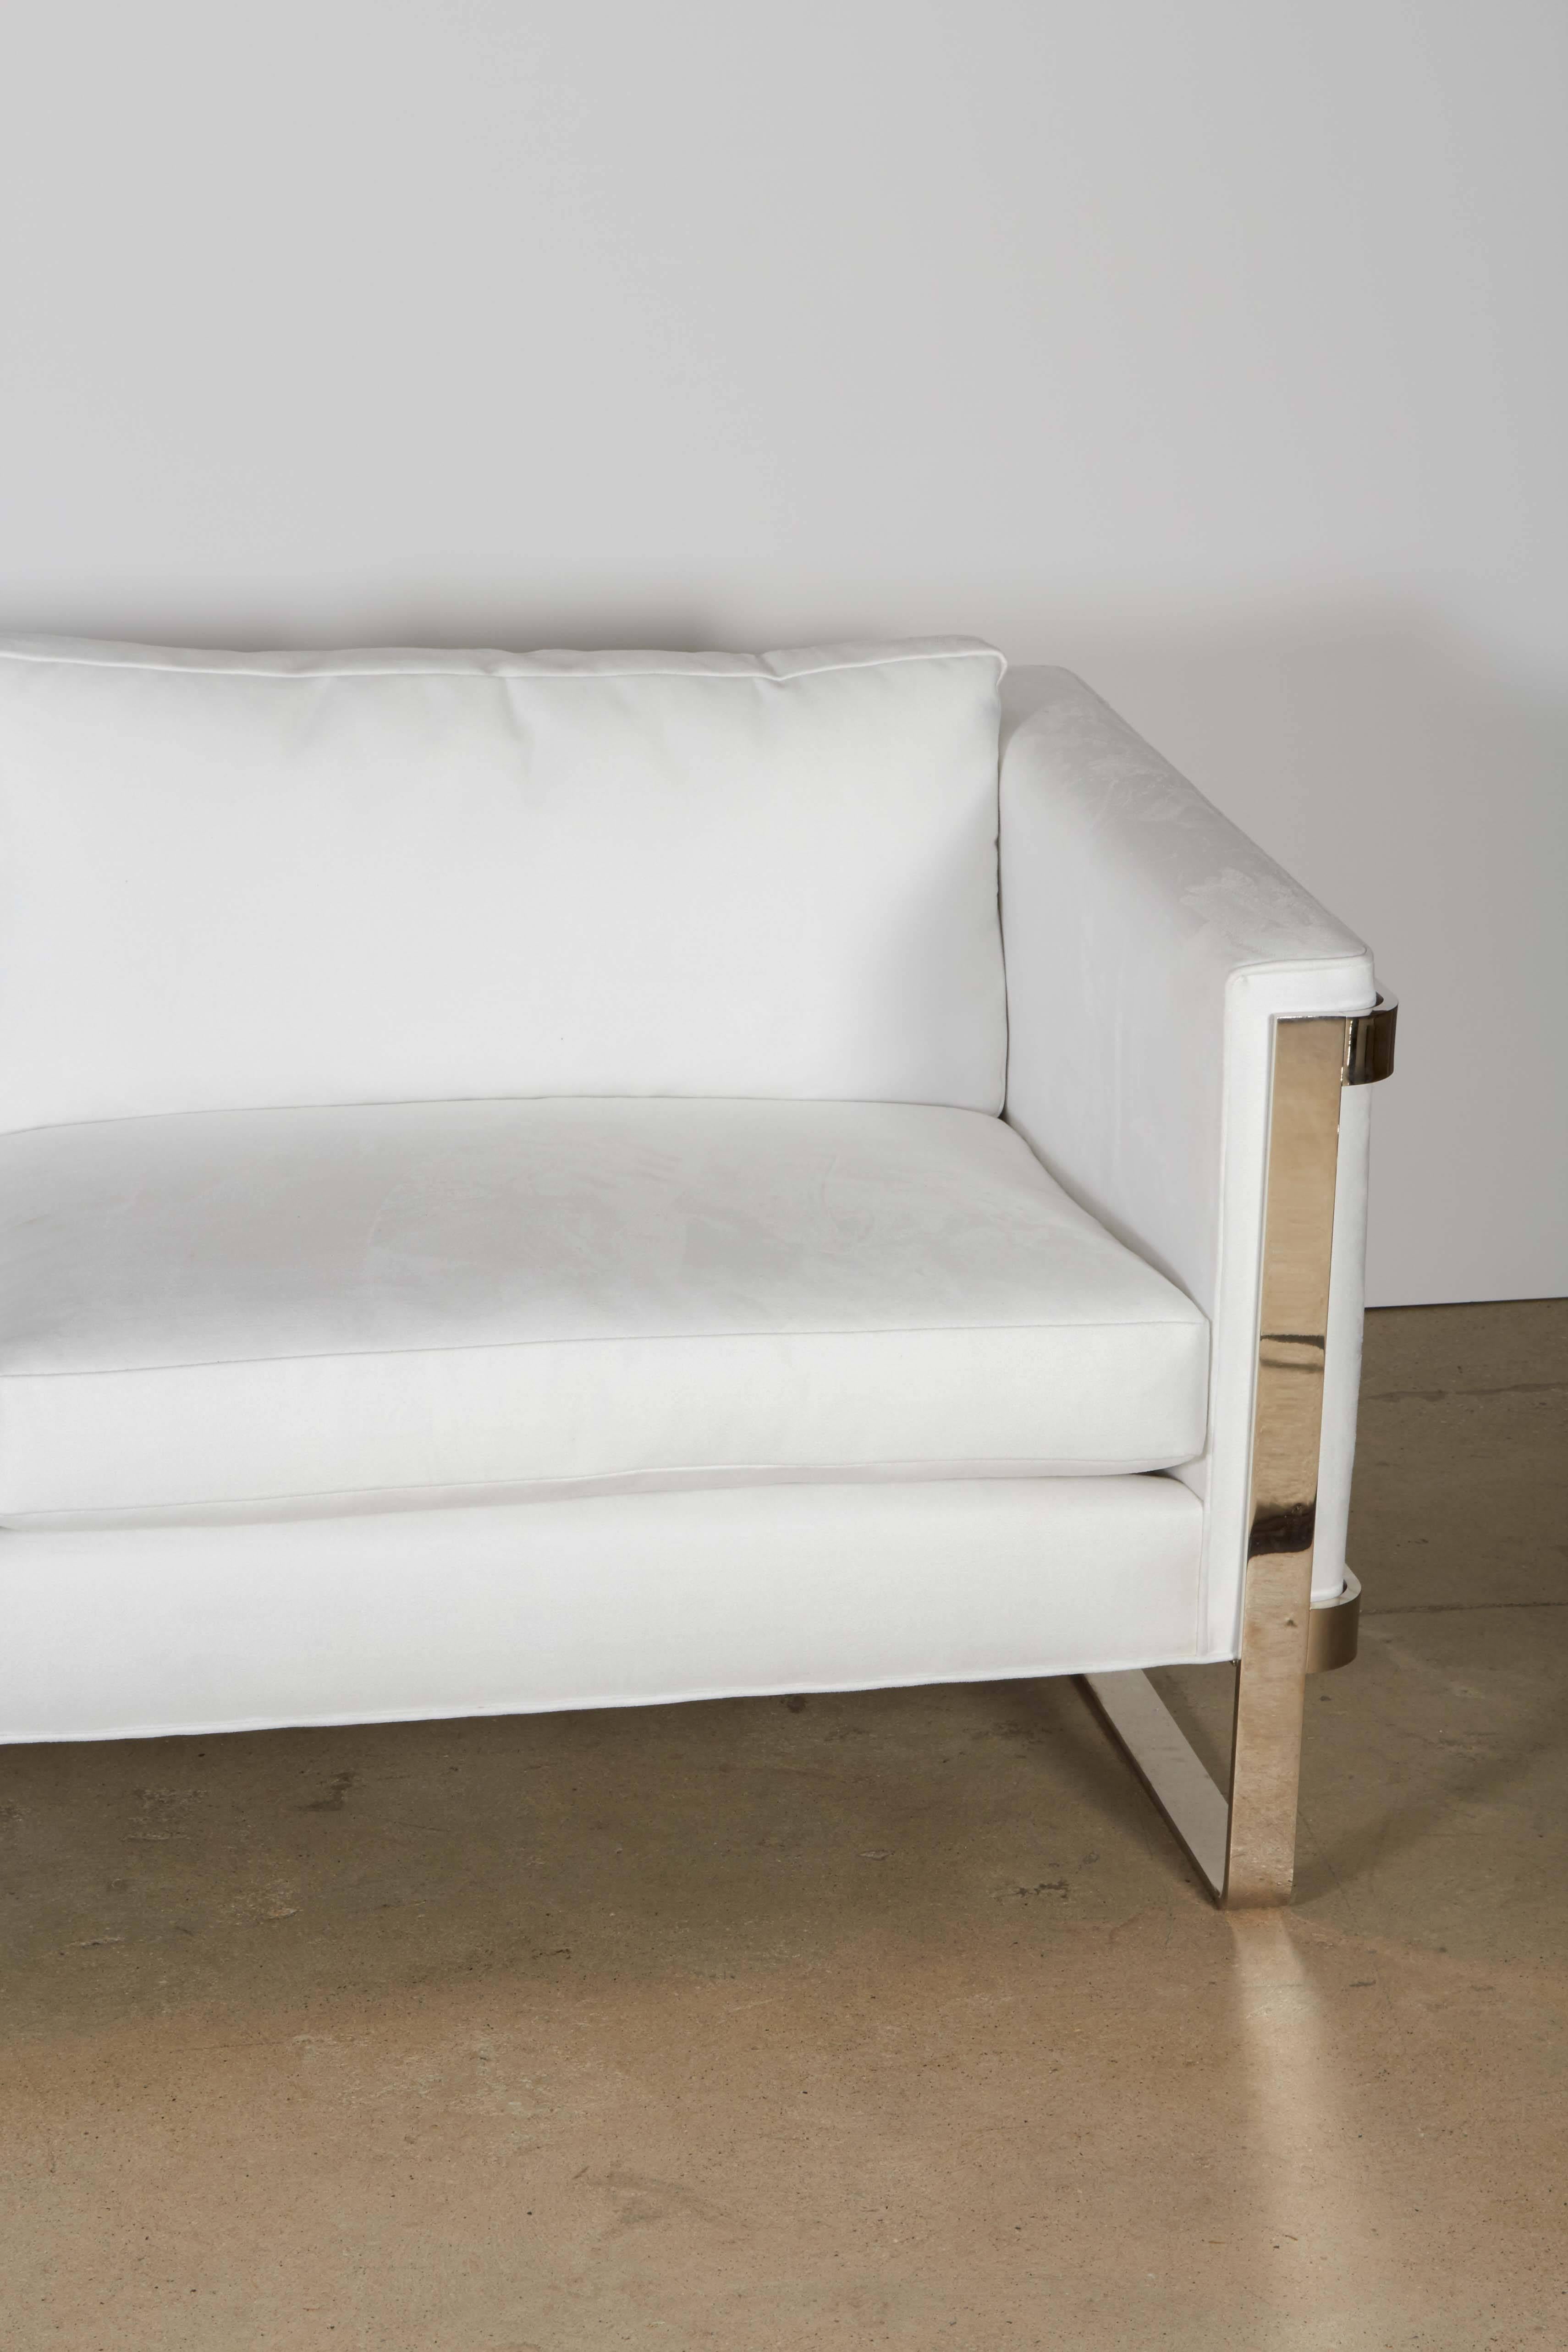 The sofa has been recovered in a heavy duty, high quality ultra suede fabric. Its pure white but easy to clean. The steel encasement has been nickel-plated.